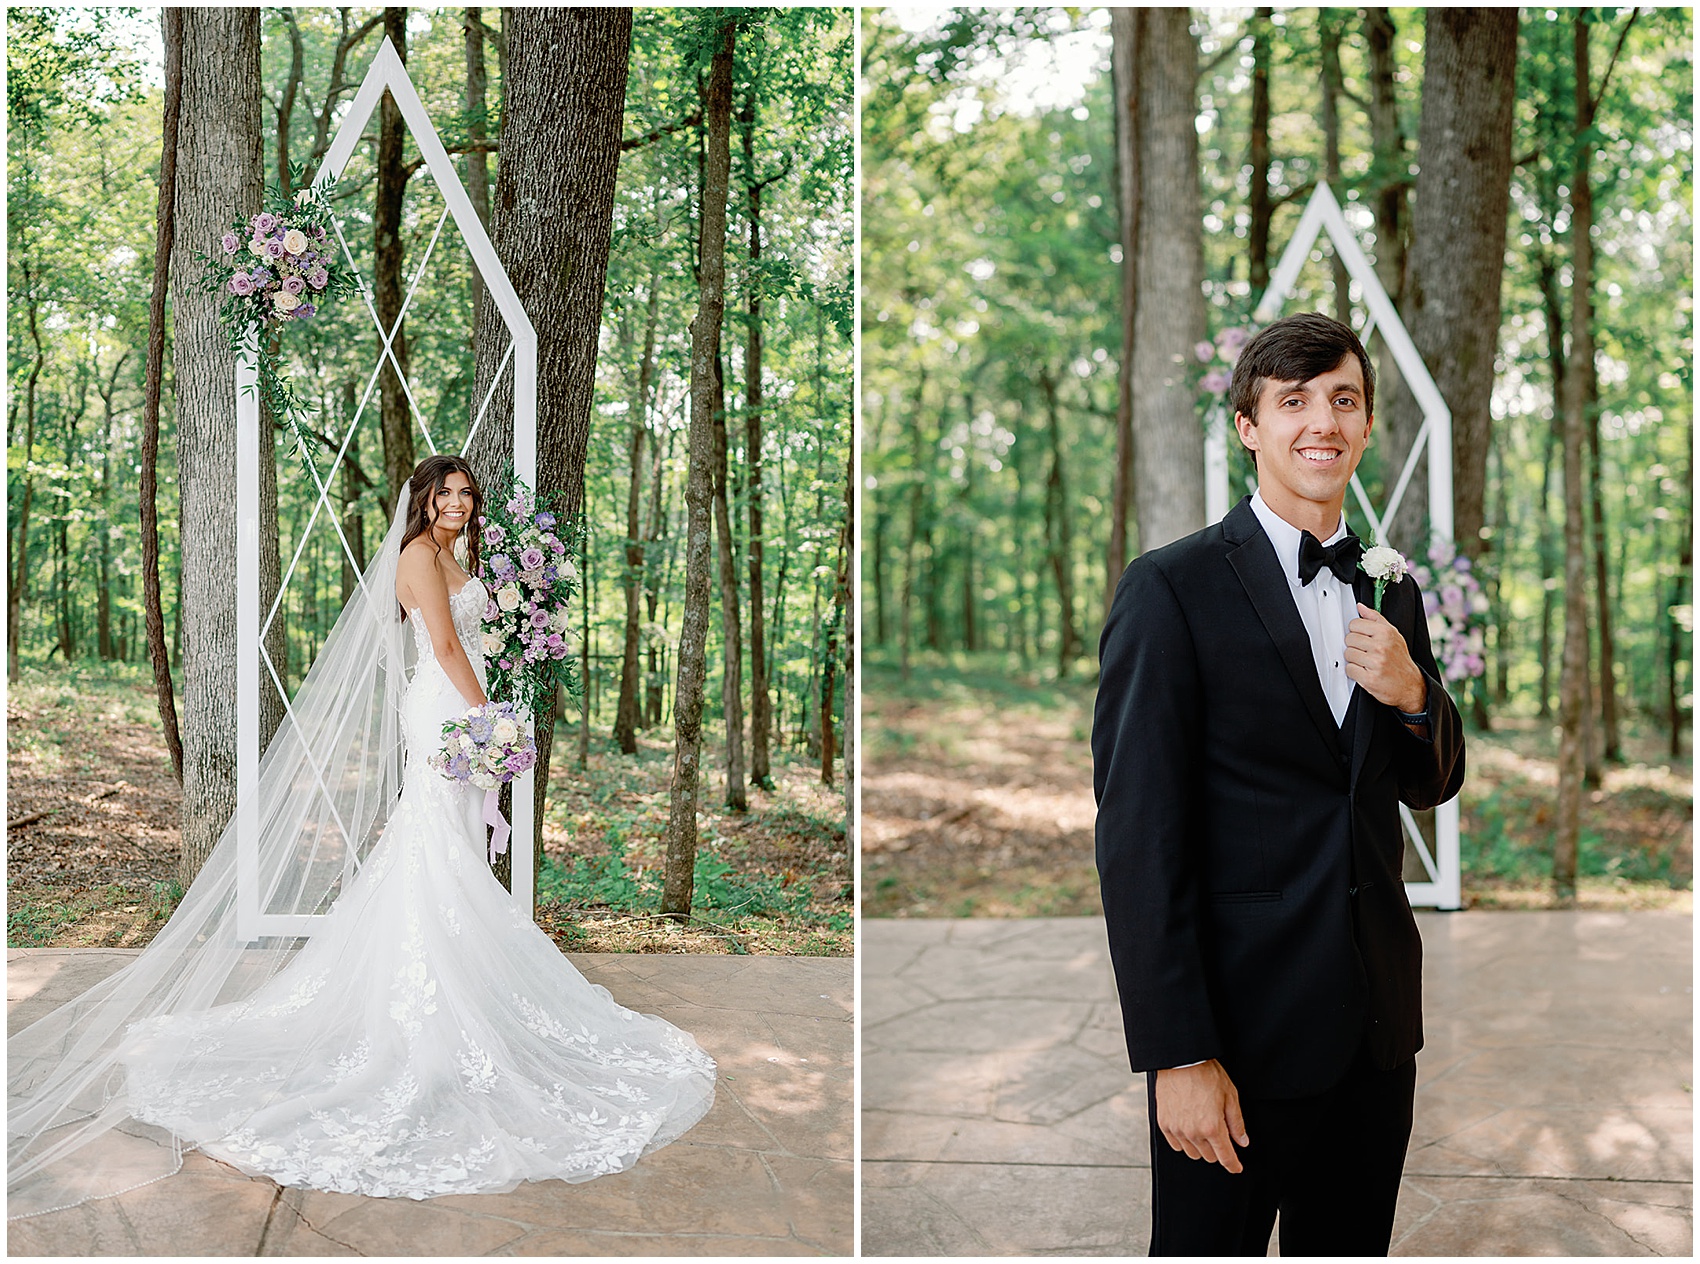 A bride and groom stand in a forest holding the purple and white bouquet and the black tuxedo lapel